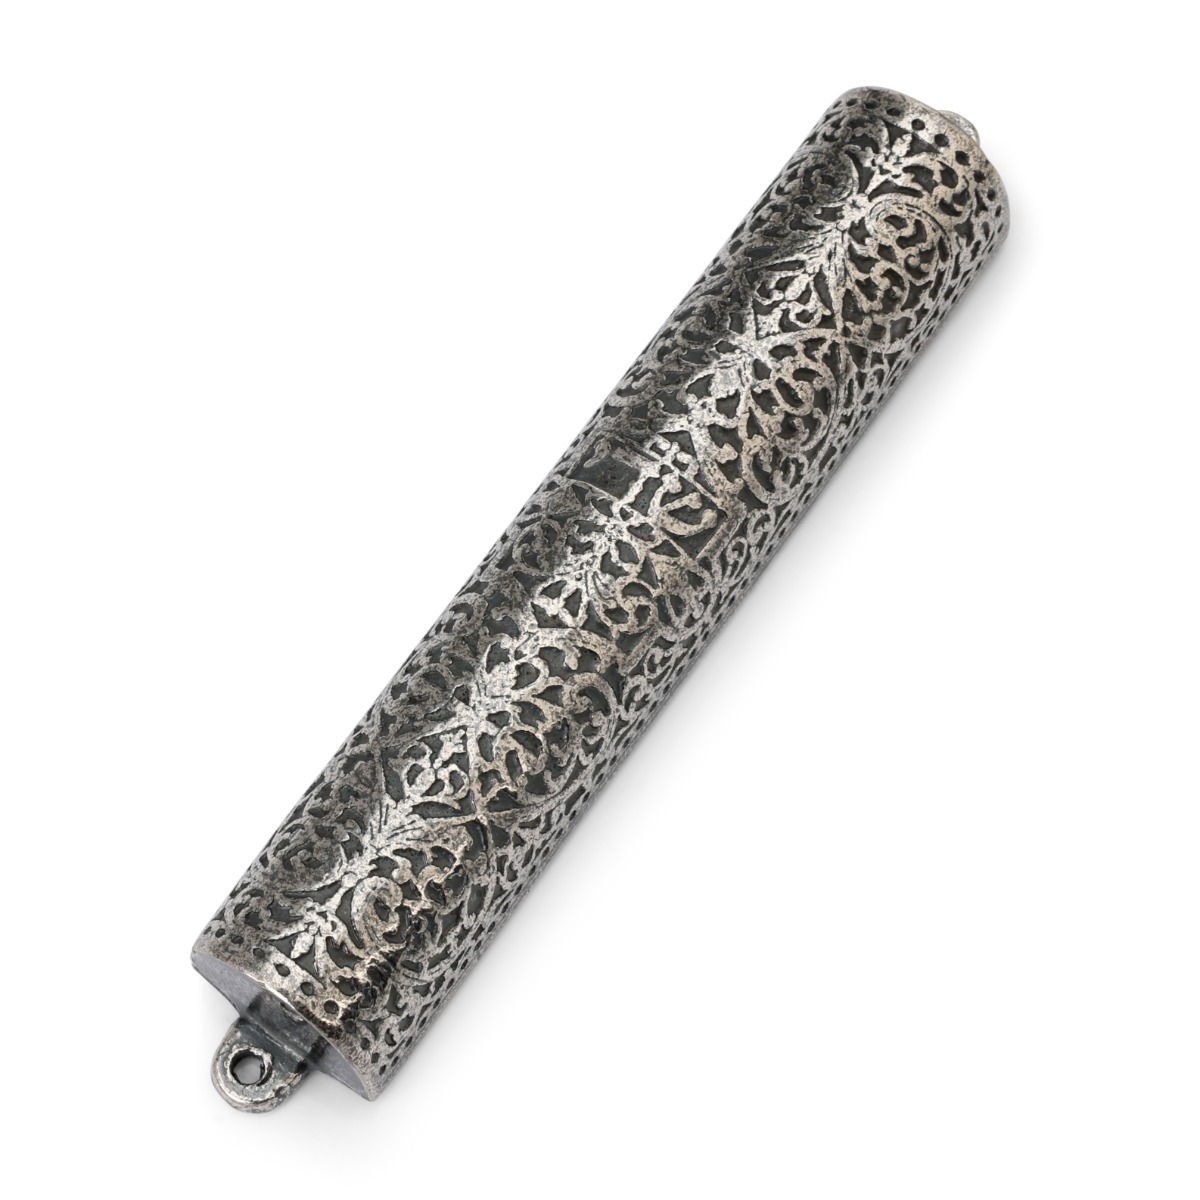 Israel Museum Pewter Mezuzah Case With Adaptation of 17th Century German Silver Bible Binding - 1